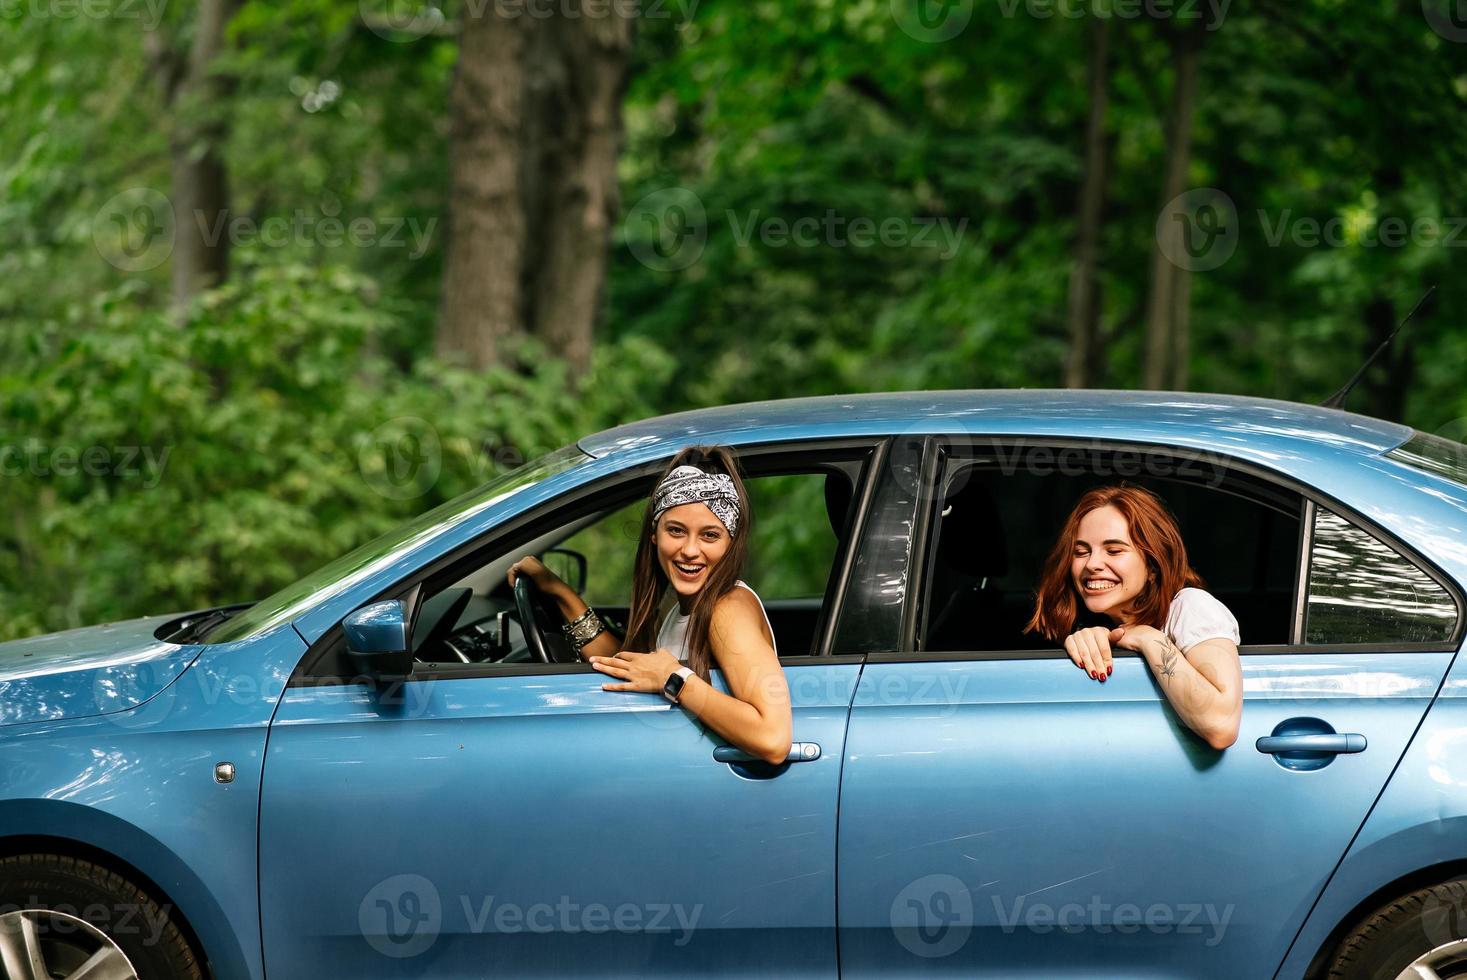 Two girlfriends fool around and laughing together in a car photo